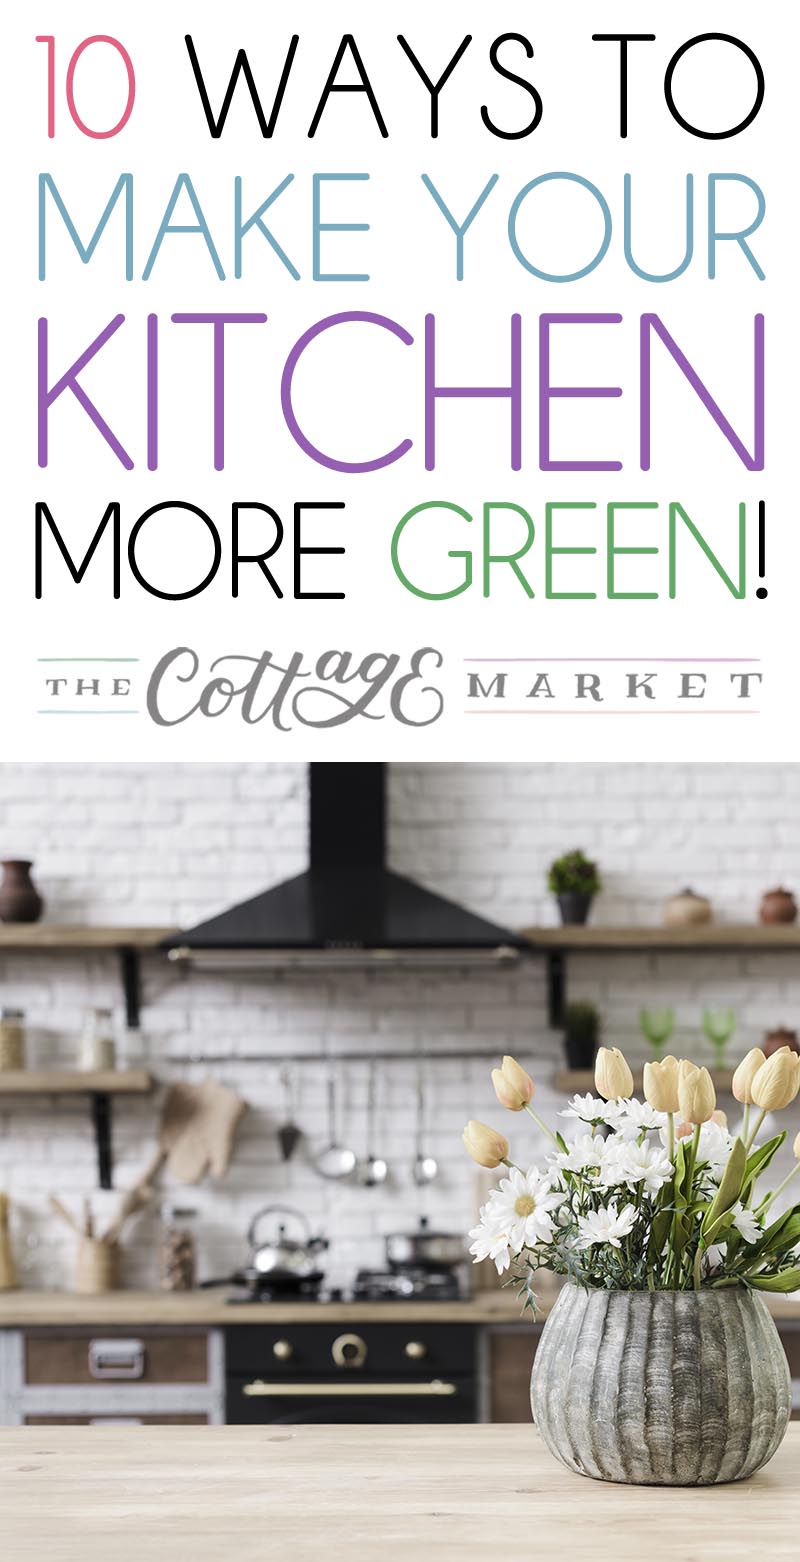 Come and Check Out These Easy 10 Ways To Make Your Kitchen More Green.  Simple steps that make a big difference for Mother Earth!